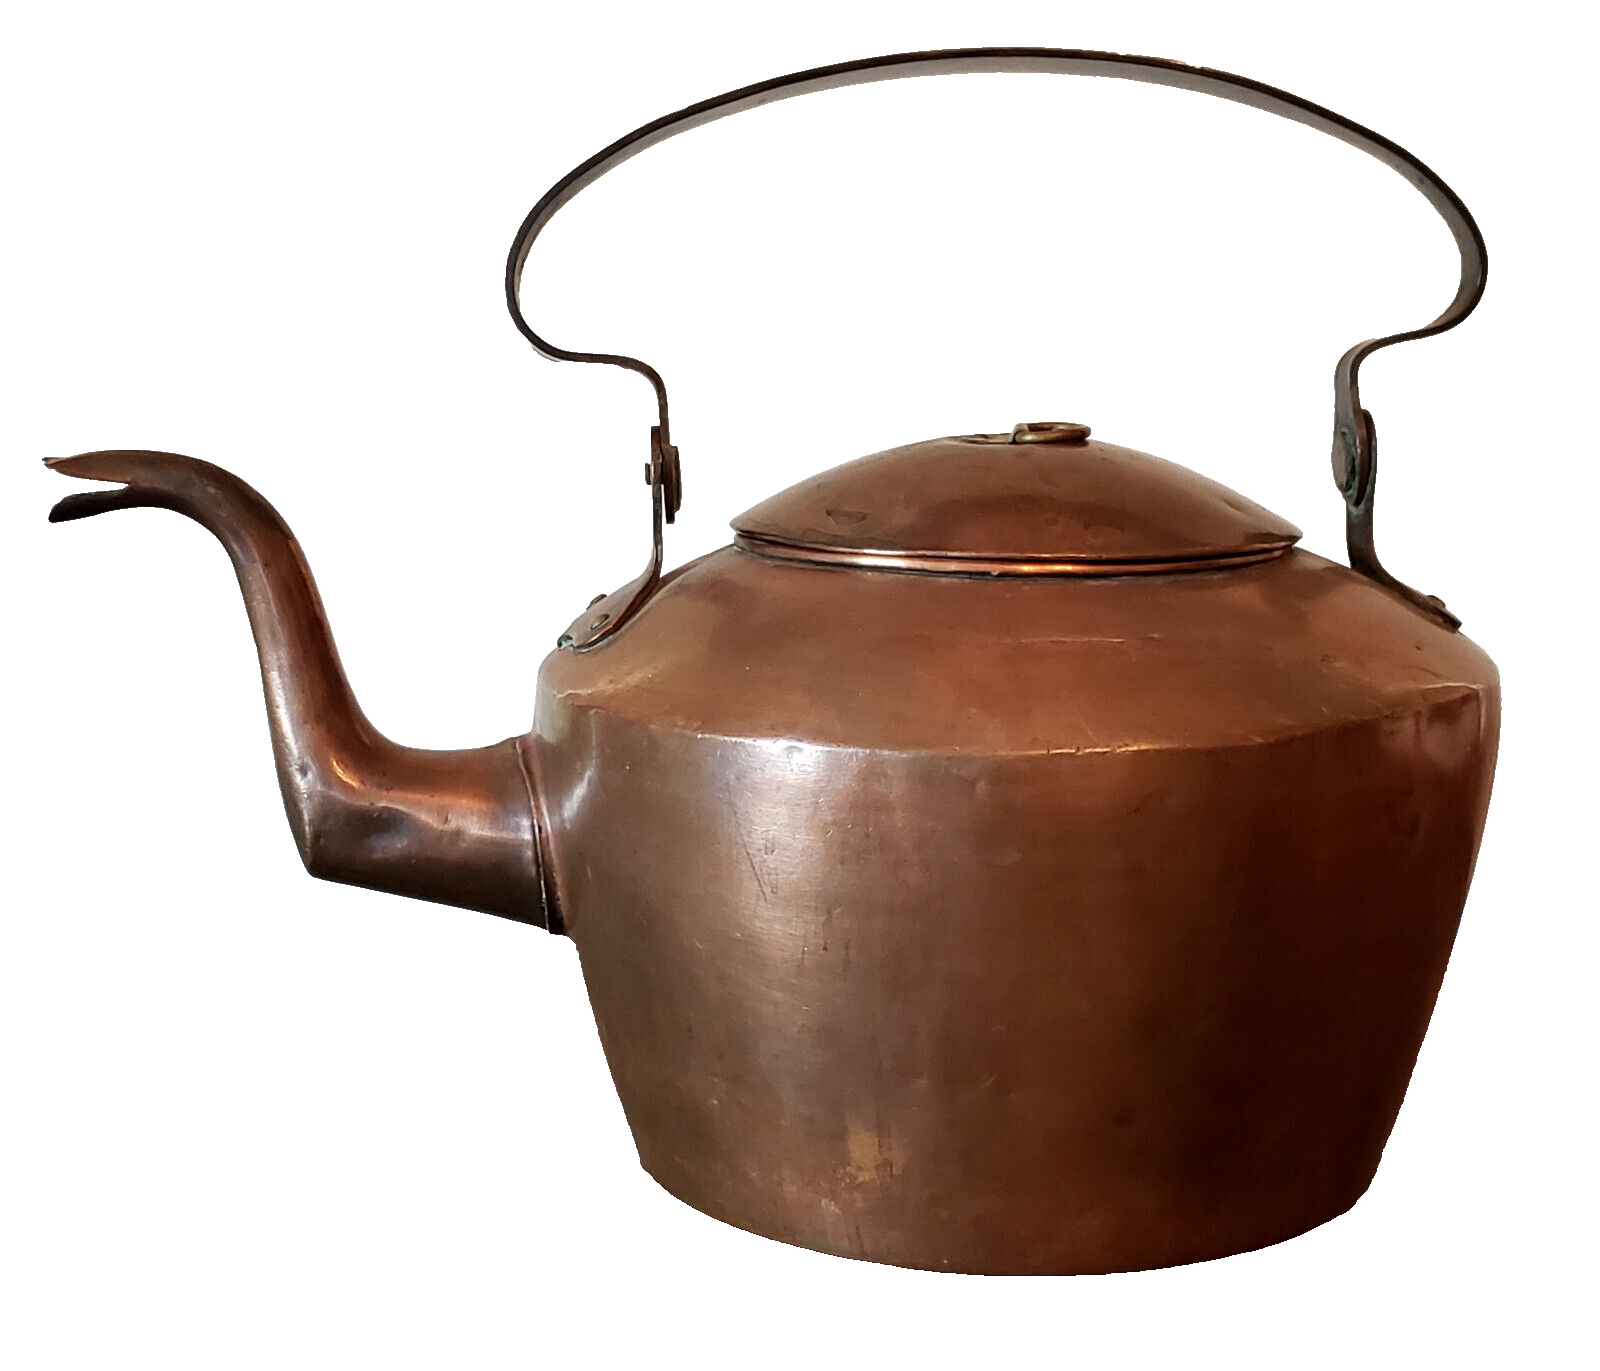 Feature Friday Finds! 19th Century Gooseneck Teapot